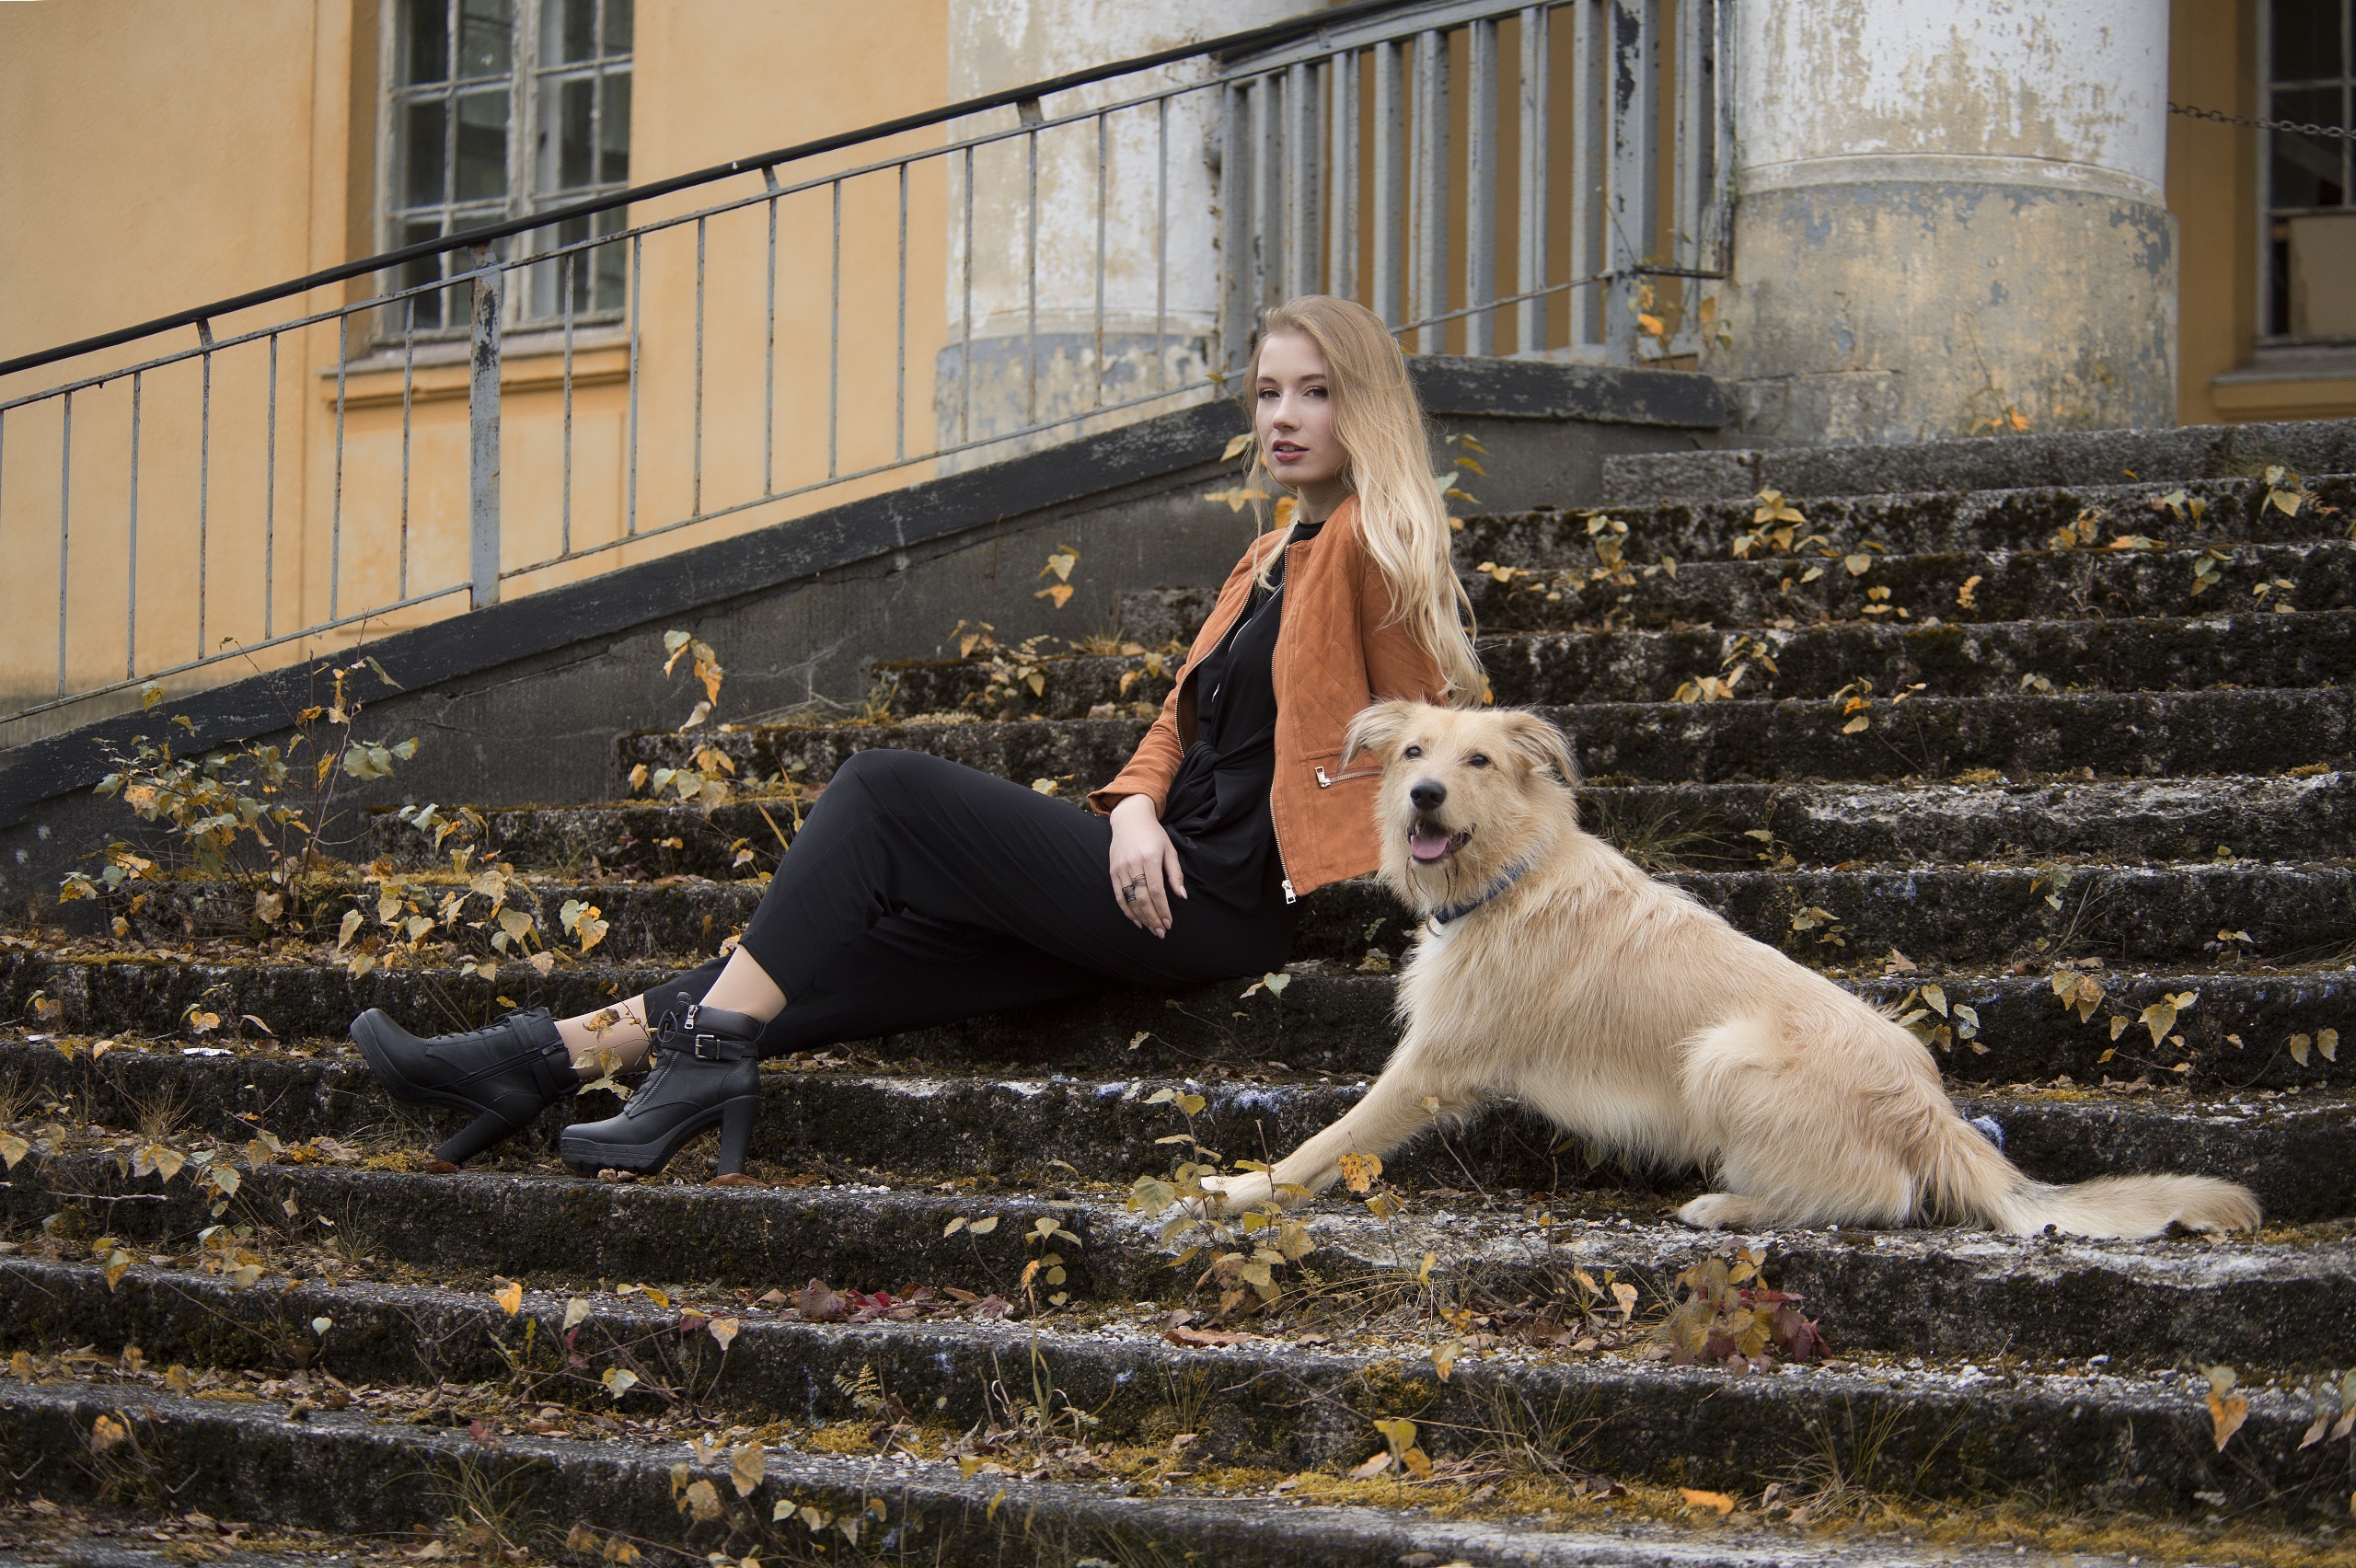 Women Dog Animals Stairs Blonde House Women Outdoors Women With Dogs Jacket Brown Jacket Model 2560x1704